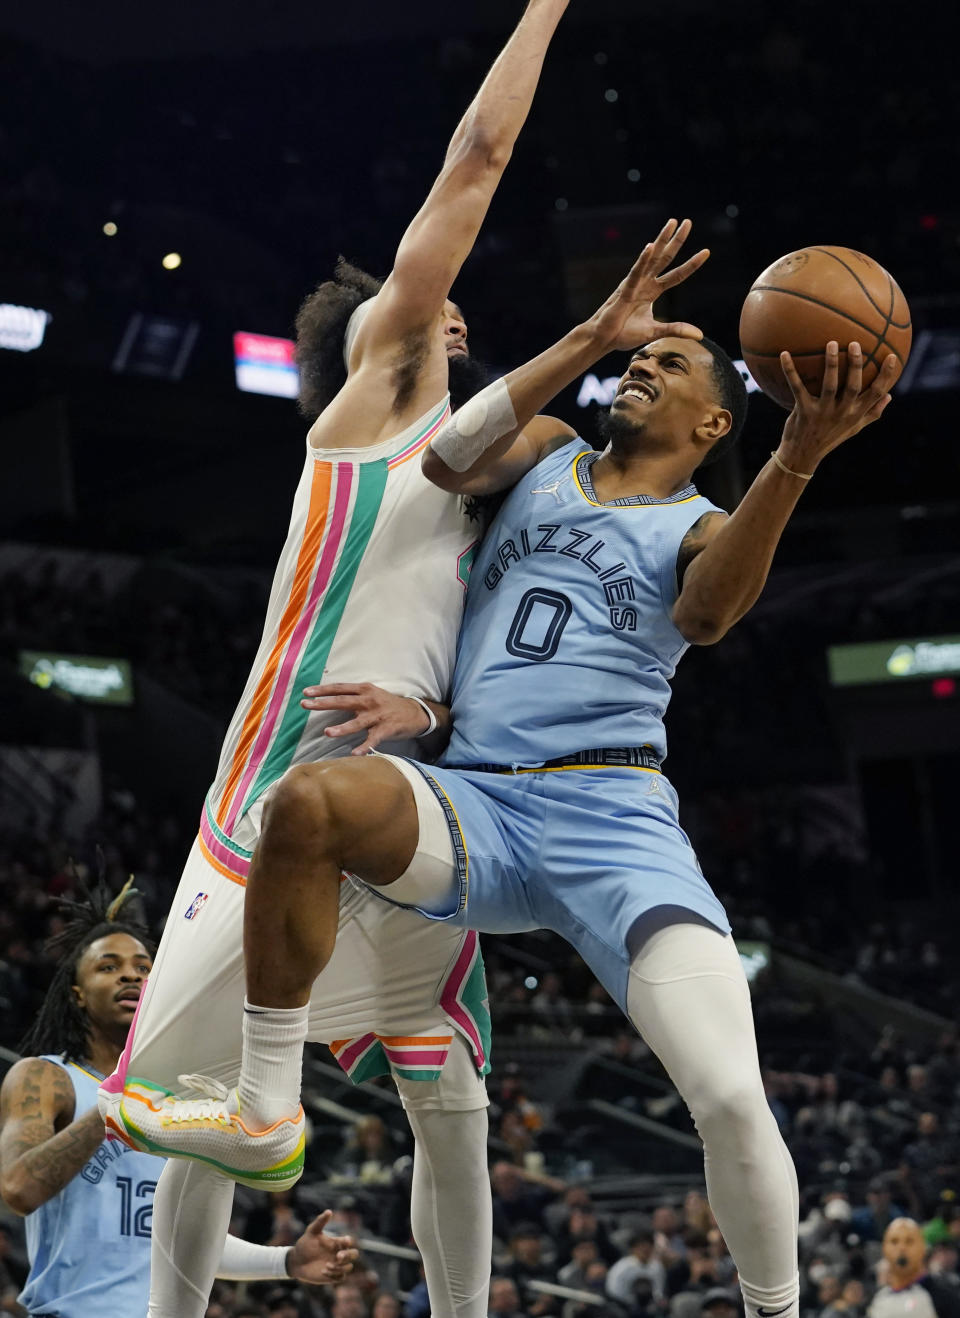 Memphis Grizzlies guard De'Anthony Melton (0) drives to the basket against San Antonio Spurs guard Derrick White (4) during the second half of an NBA basketball game, Wednesday, Jan. 26, 2022, in San Antonio. (AP Photo/Eric Gay)